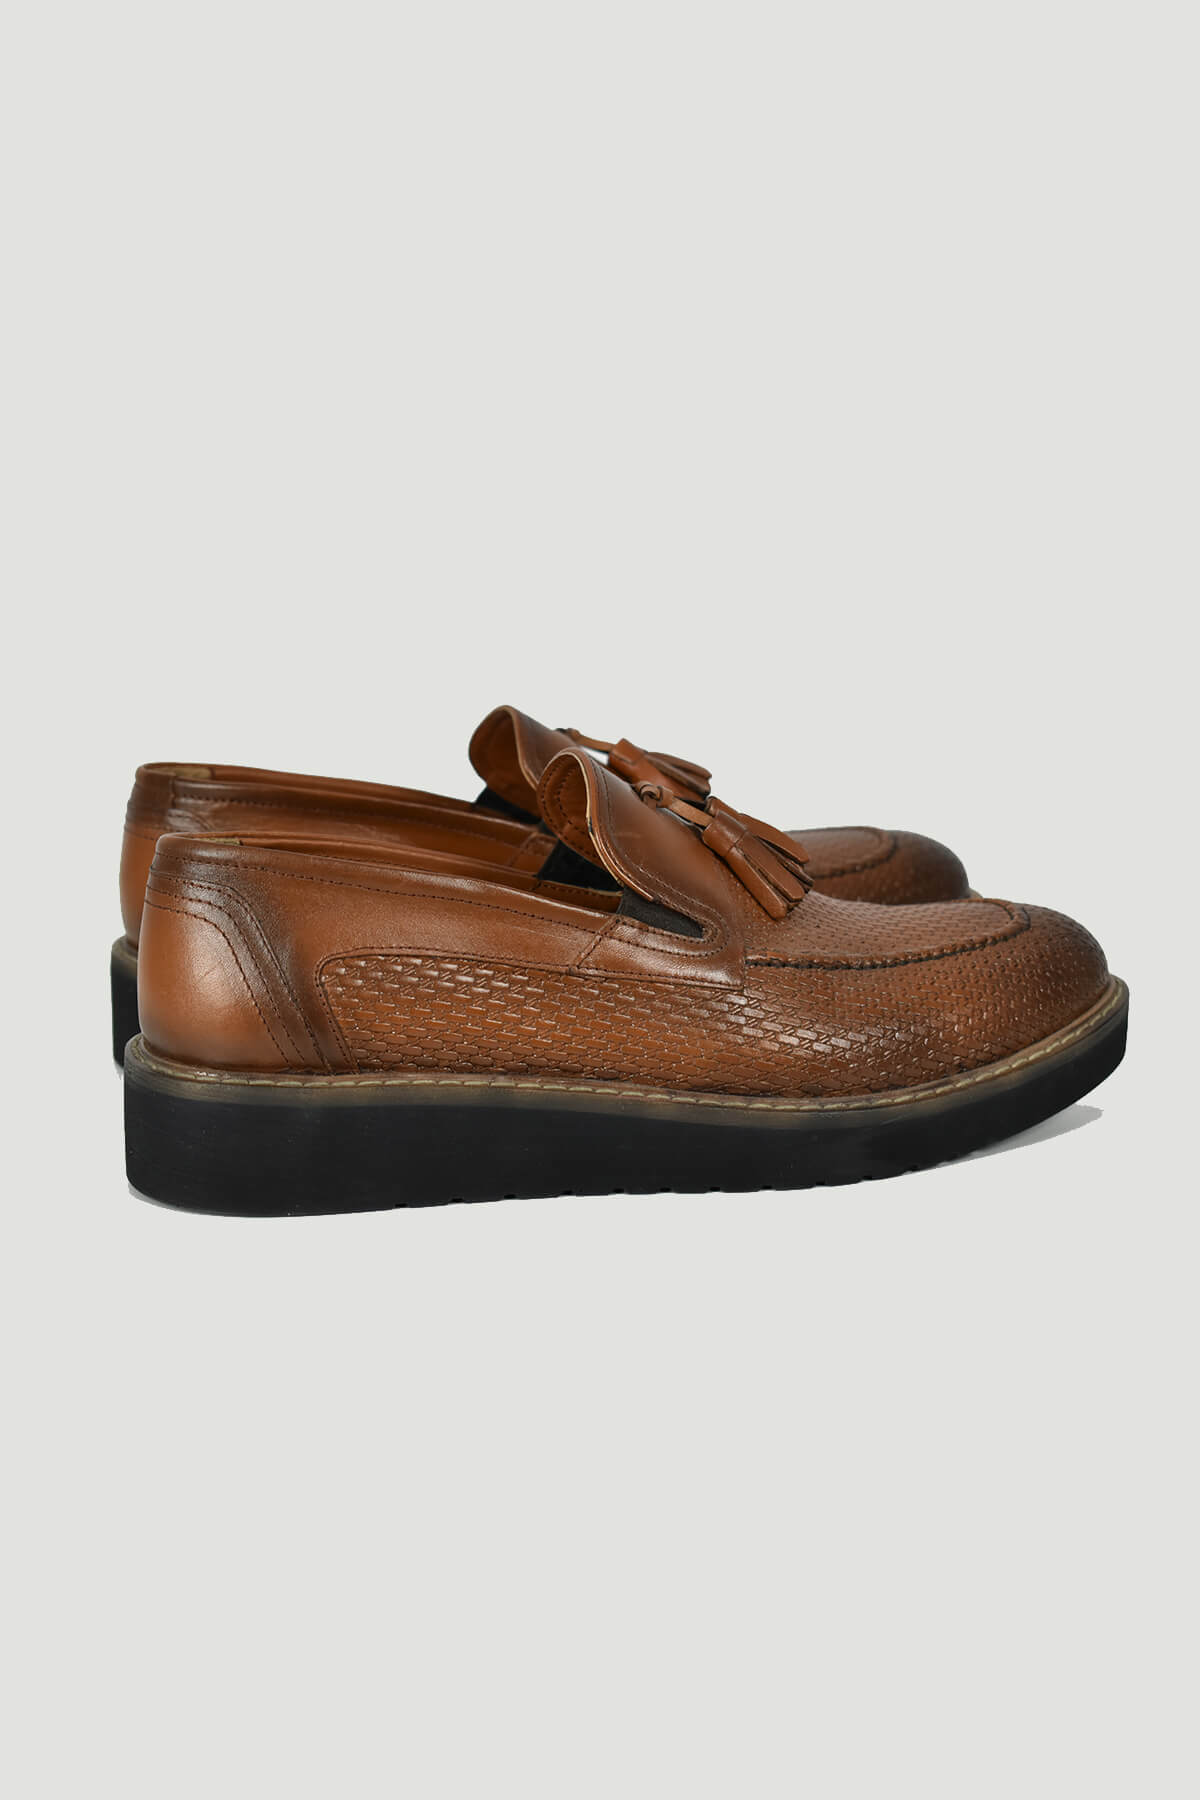 Fenomilano Leather Loafer